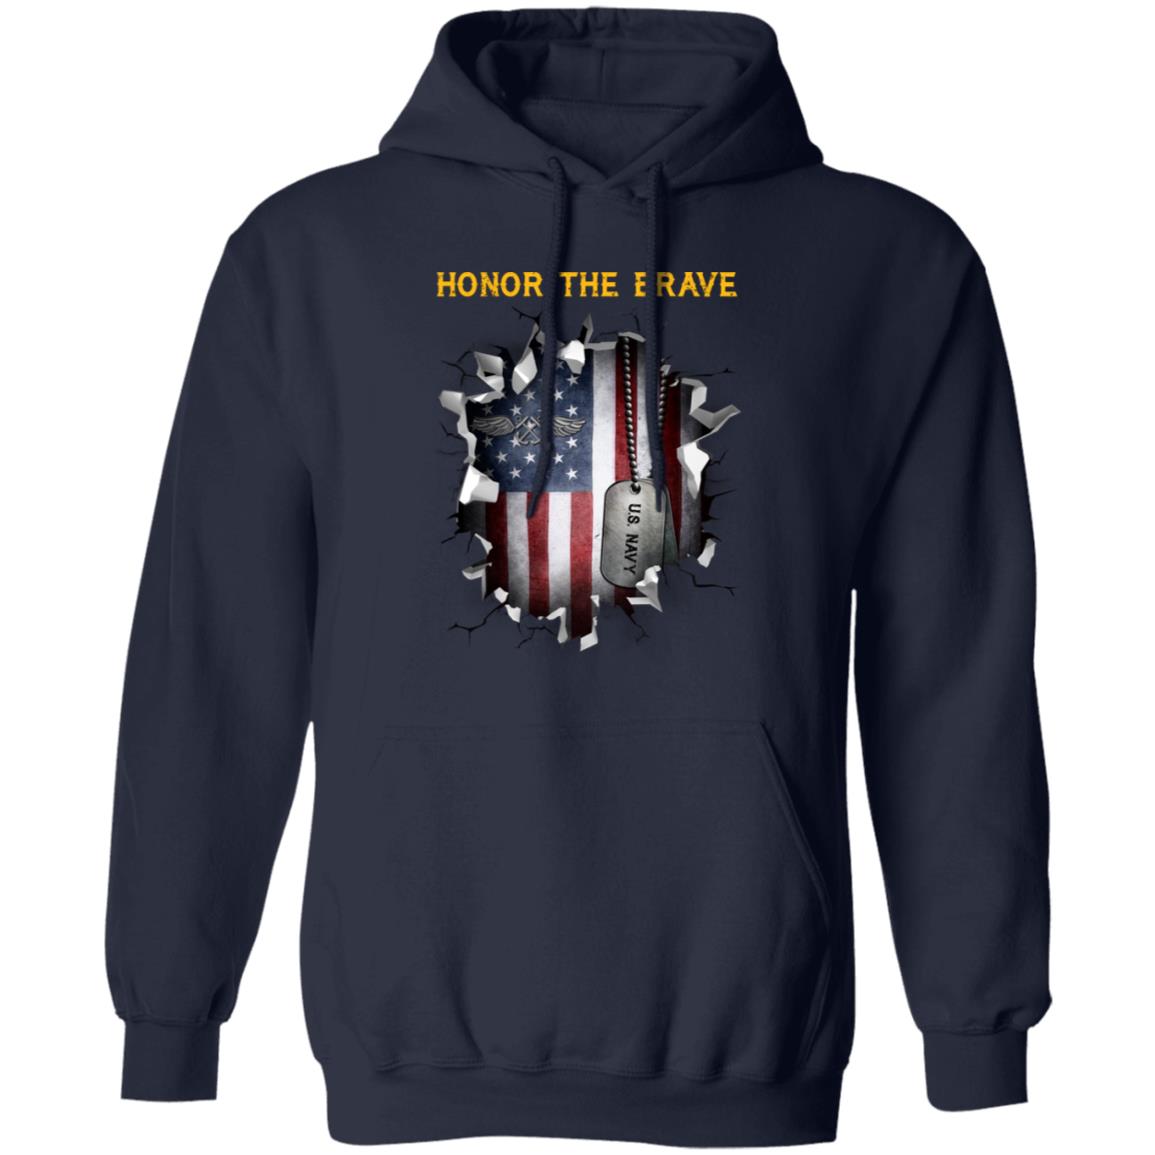 U.S Navy Aviation Boatswain_s Mate Navy AB - Honor The Brave Front Shirt